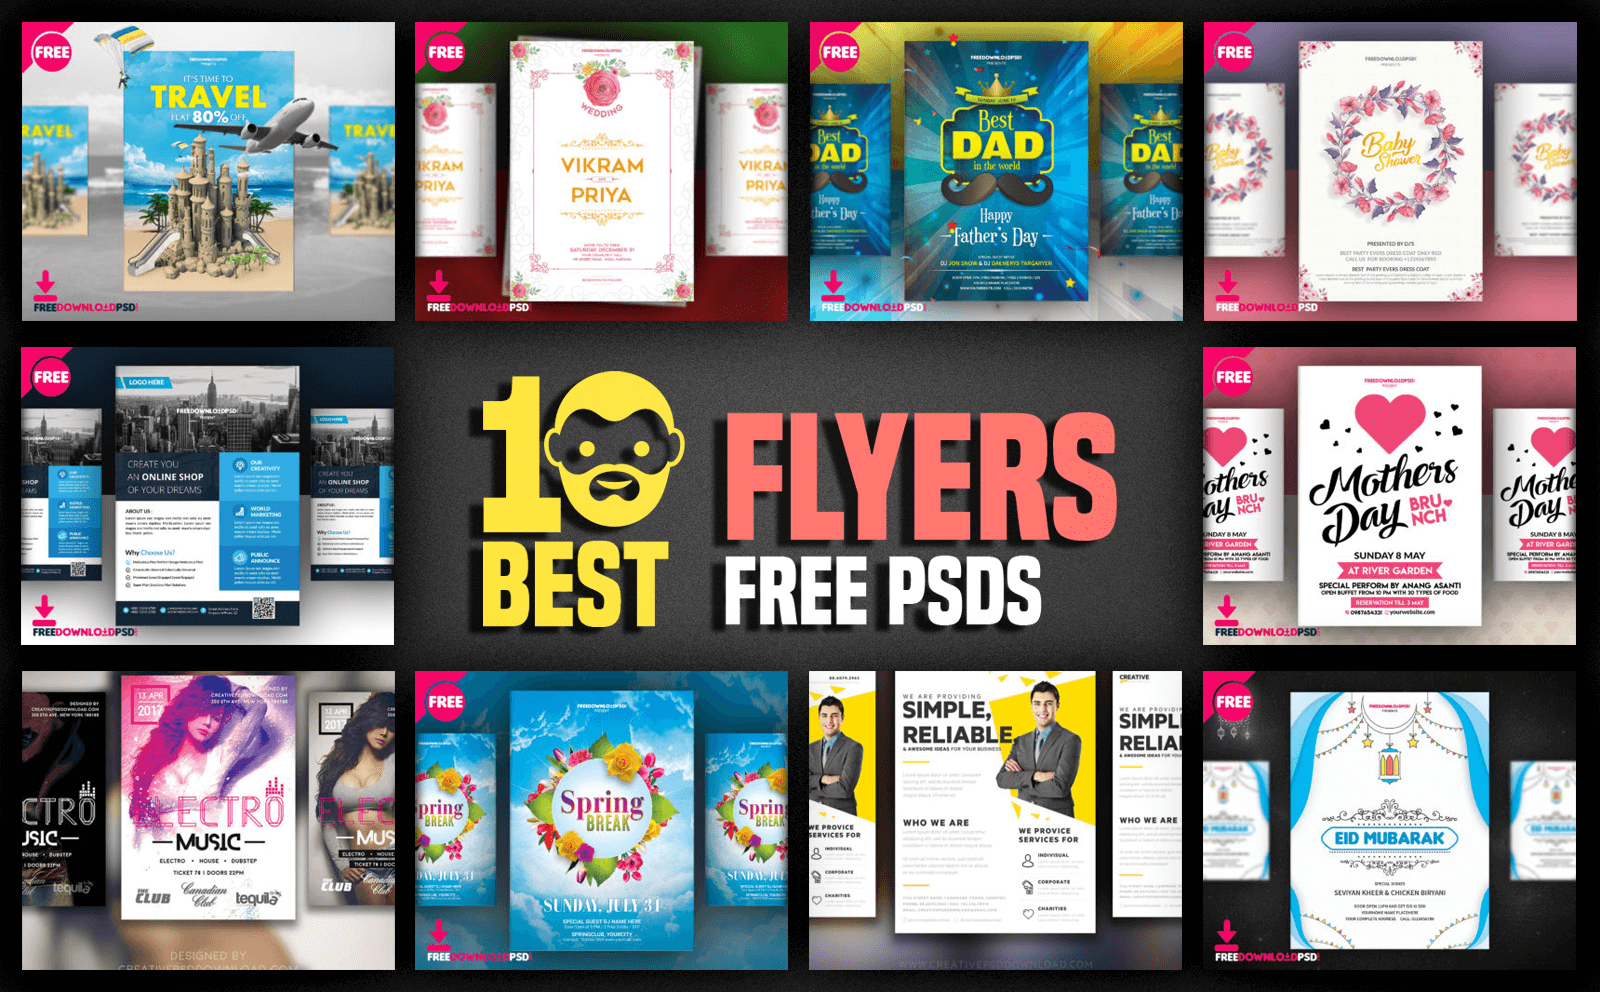 20 Best Flyers Free PSD  PsdDaddy.com Within Design Flyers Templates Online Free